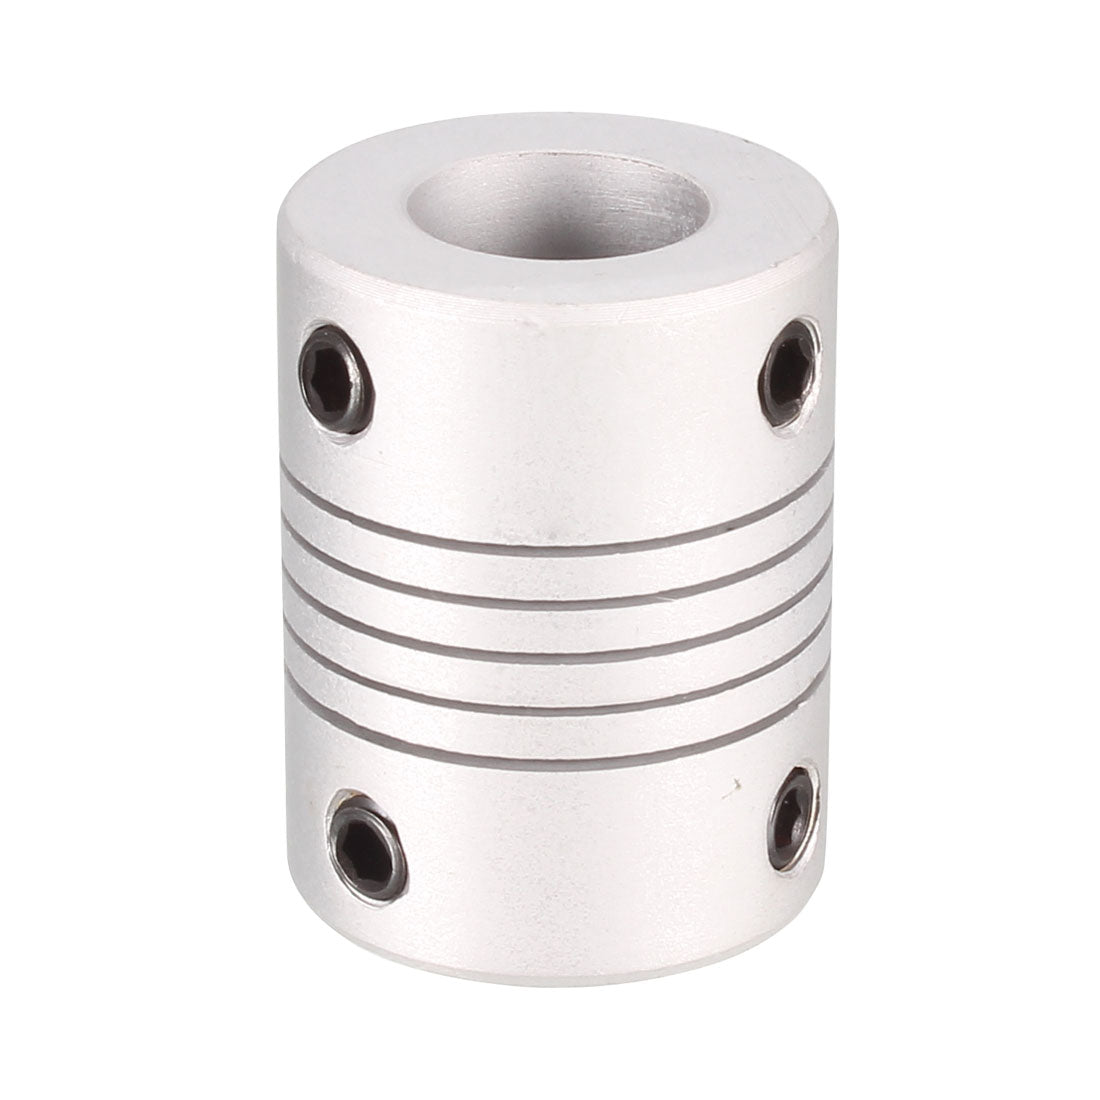 uxcell Uxcell 6mm to 10mm Aluminium Alloy Shaft Coupling Flexible Coupler Motor Connector Joint L25xD18 Silver